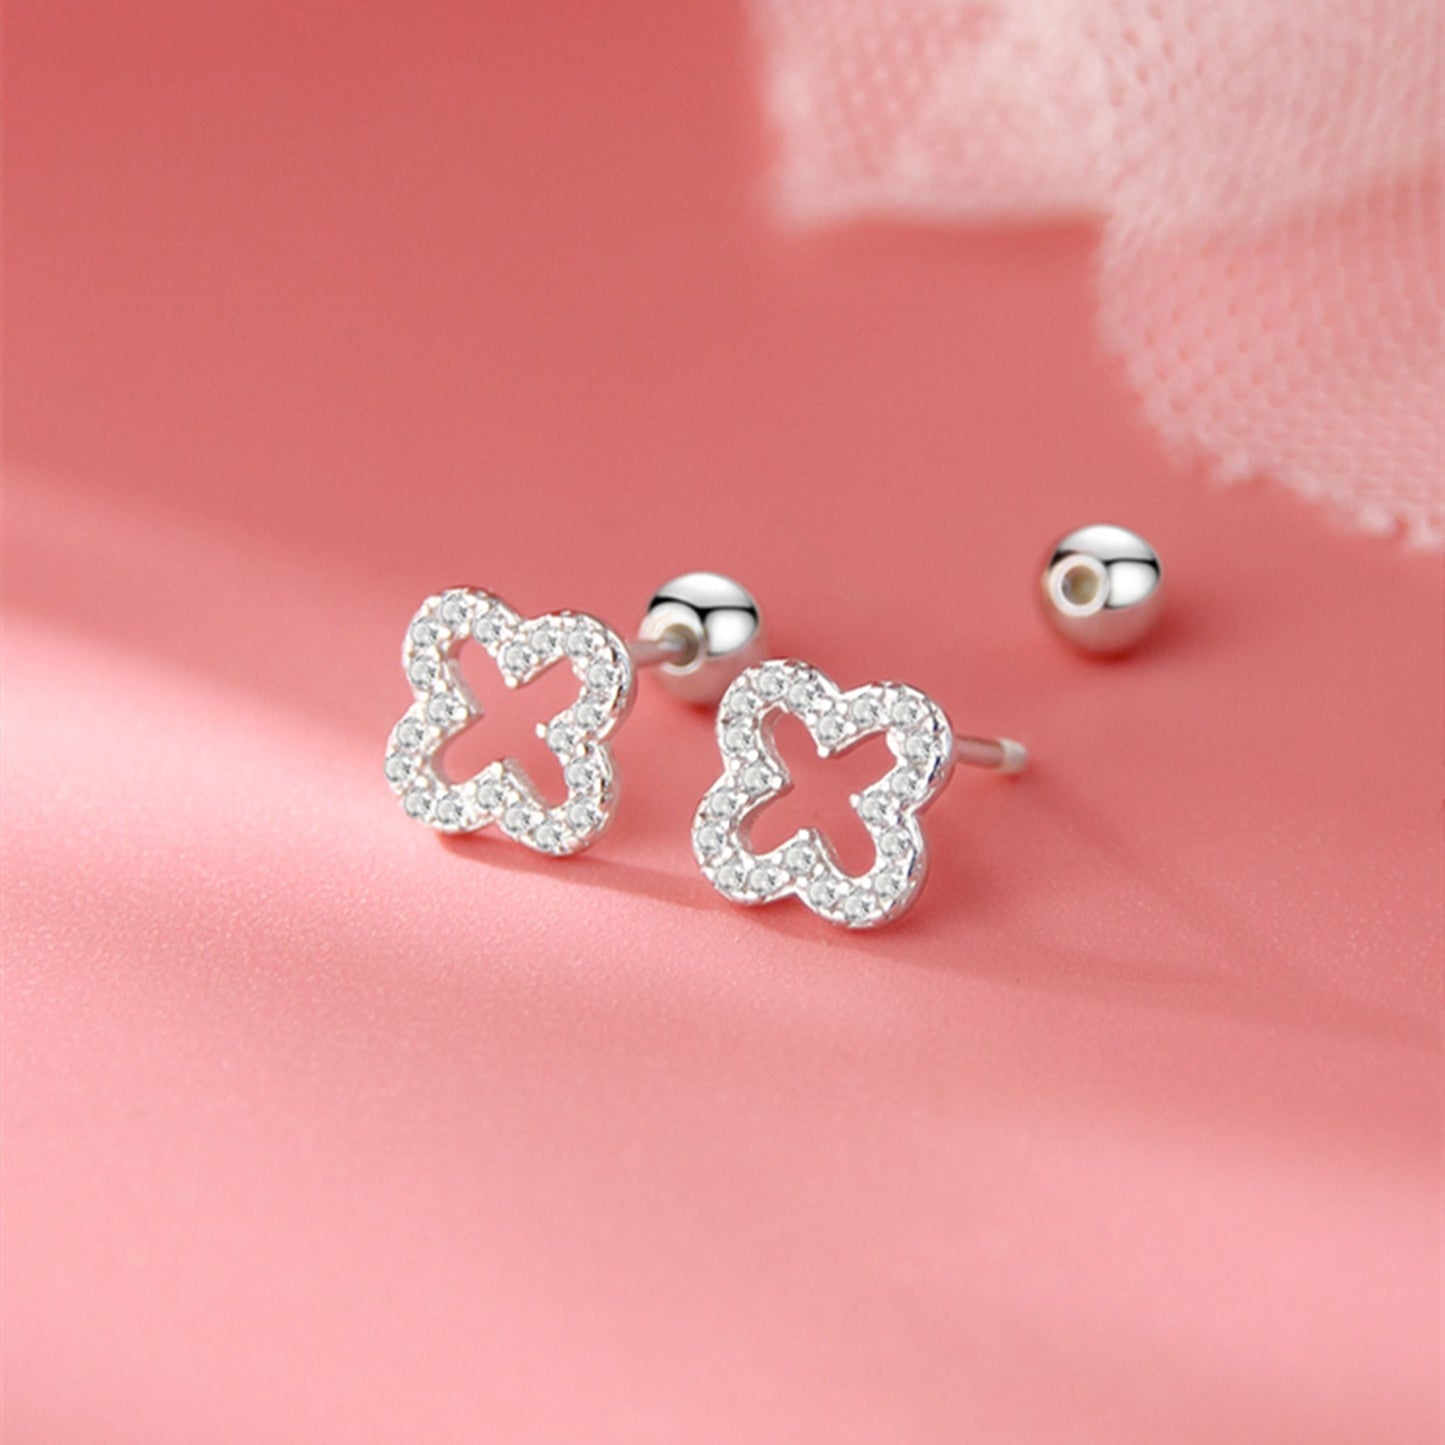 925 Sterling Silver 4 Leaf Clover Pave CZ Bead Ball Screw Back Stud Earrings